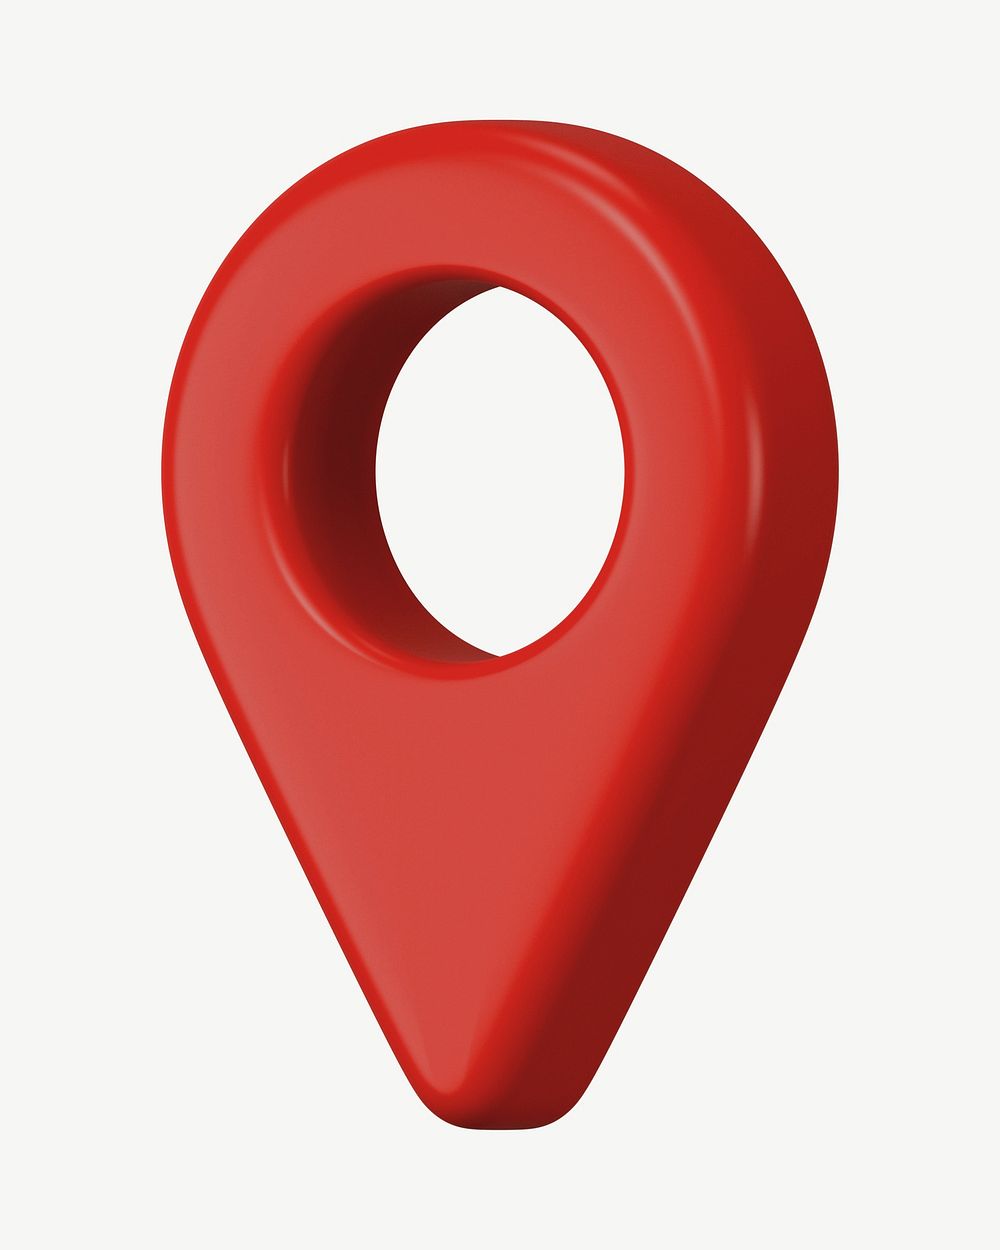 Current location red symbol collage element psd